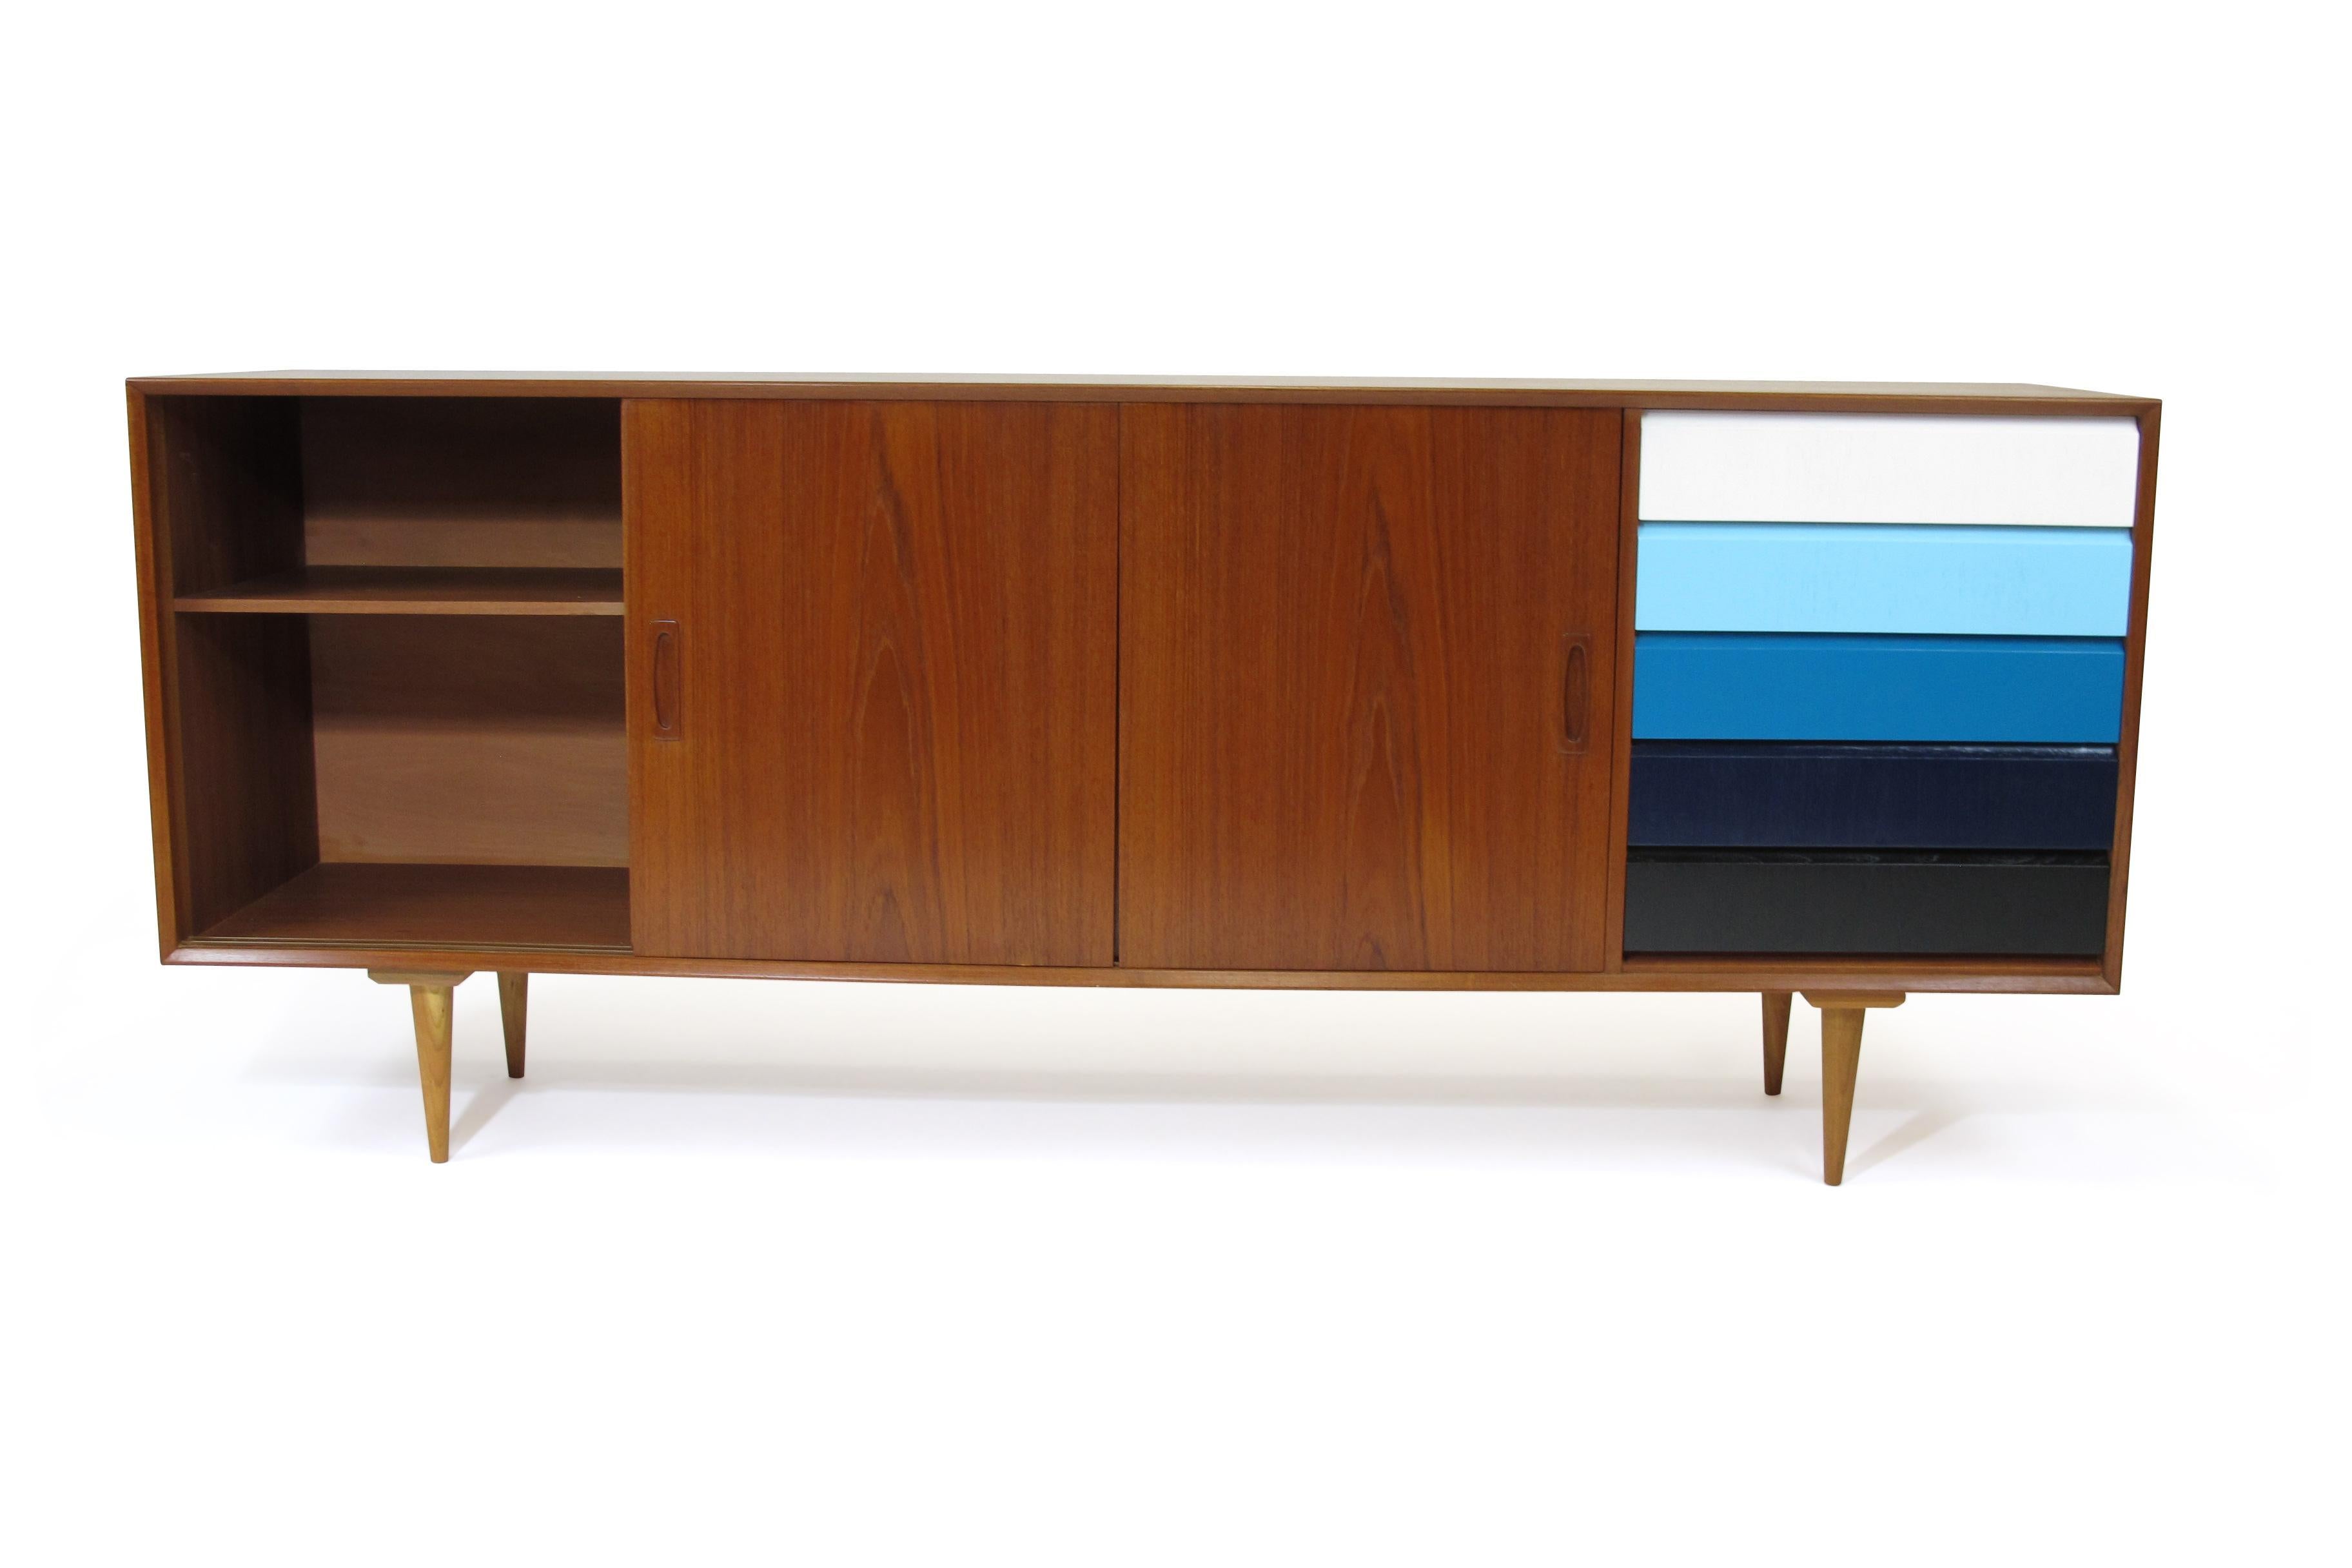 Danish teak credenza with sliding doors and adjustable interior shelf, series of color blocked drawers on right. Raised on tapered wood legs.